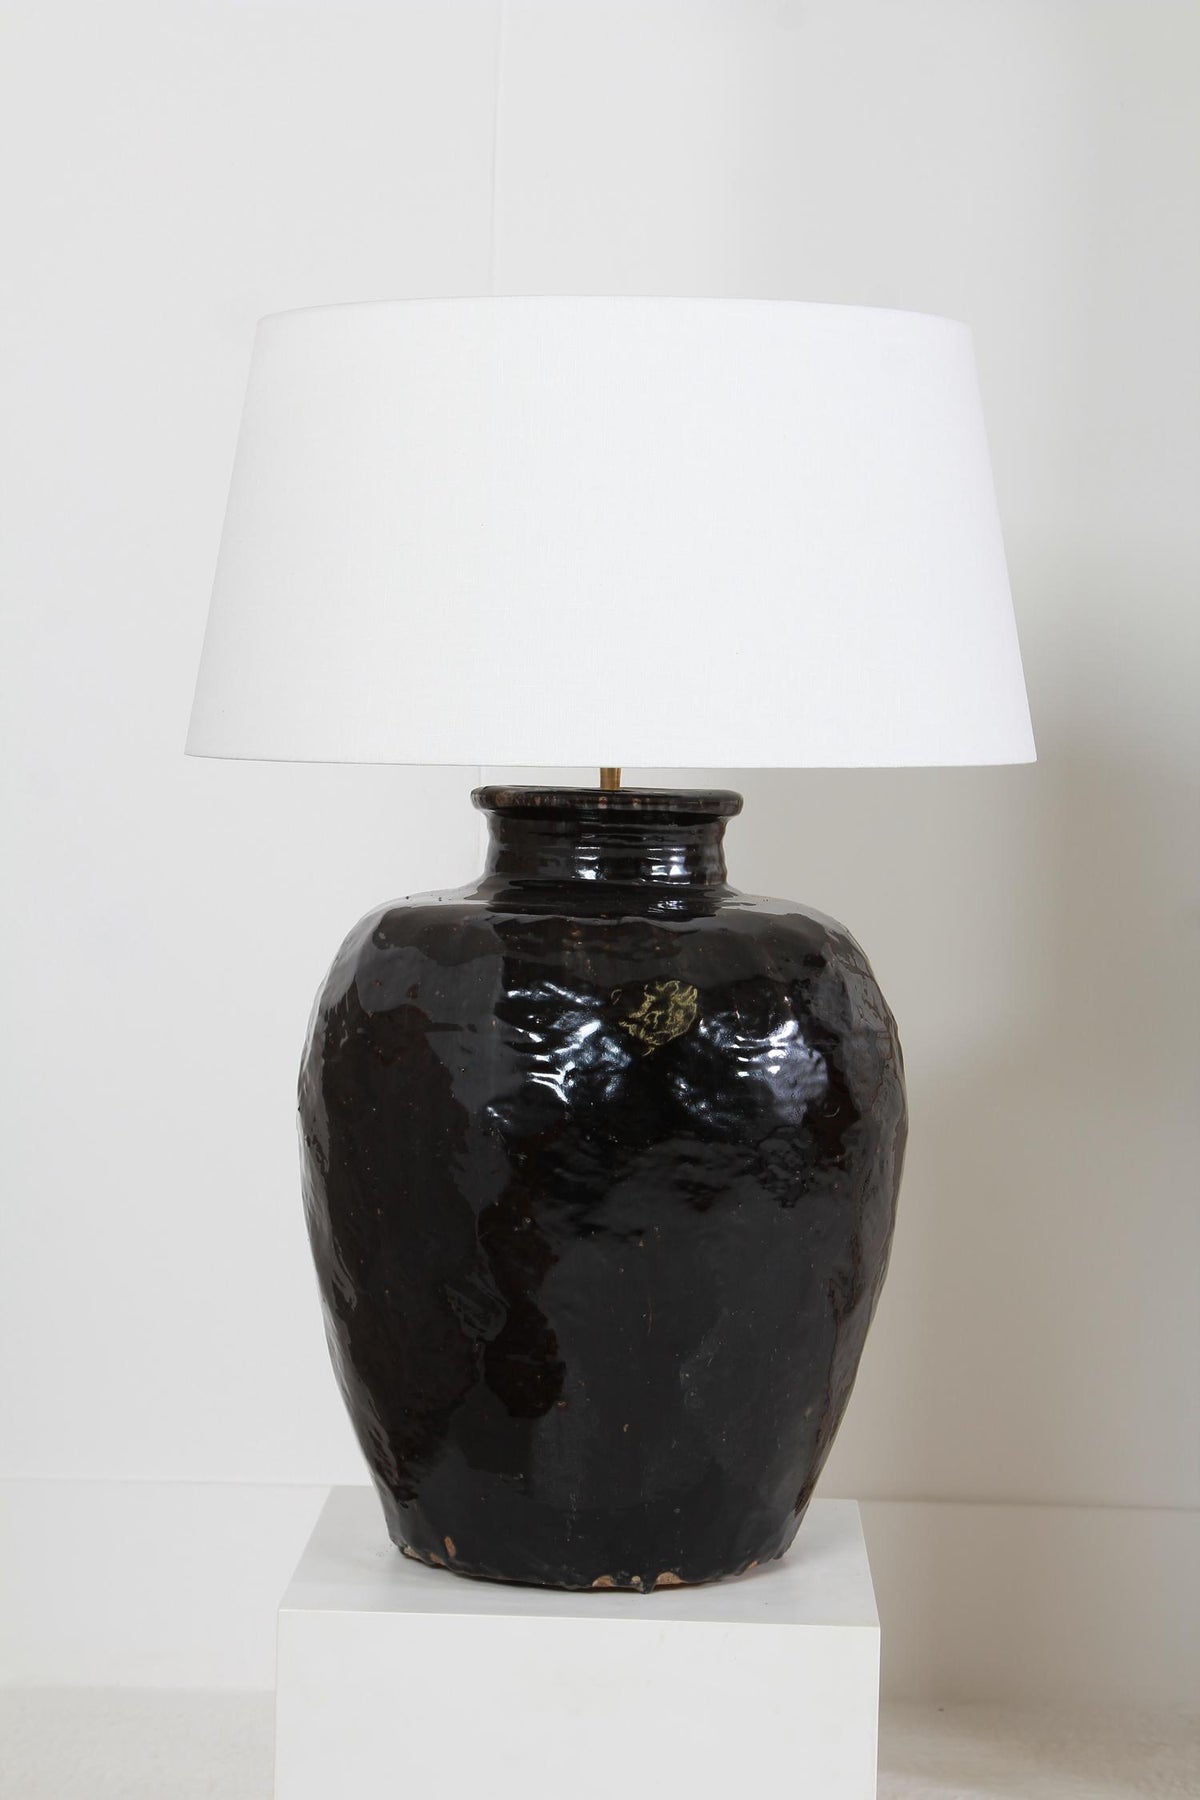 MONUMENTAL ANTIQUE BLACK GLAZED POTTERY LAMP WITH WHITE DRUM LINEN SHADE